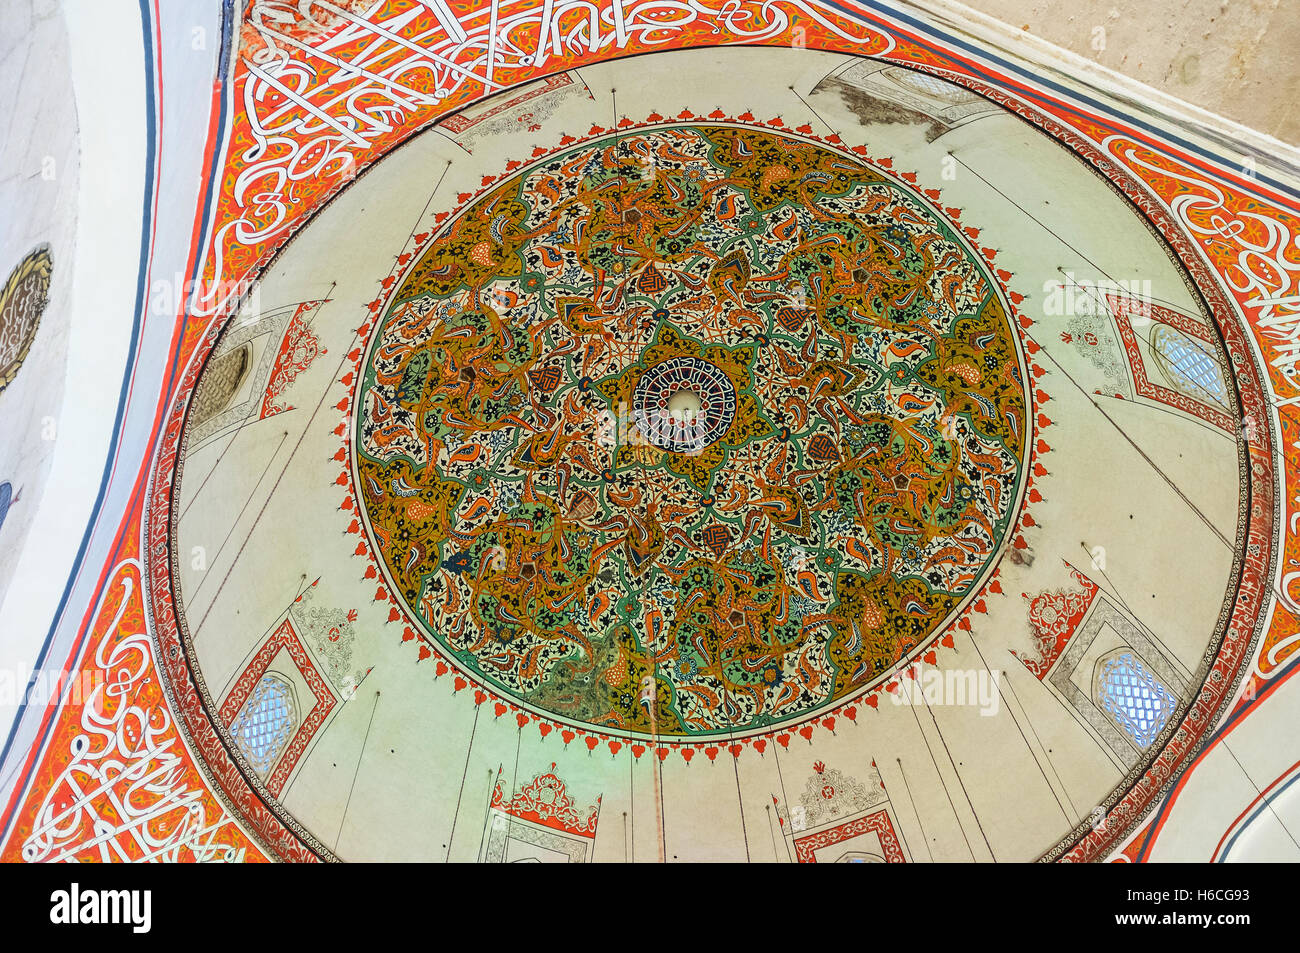 The colorful dome over the Sema Hall in Mevlana Museum decorated with floral islamic patterns Stock Photo